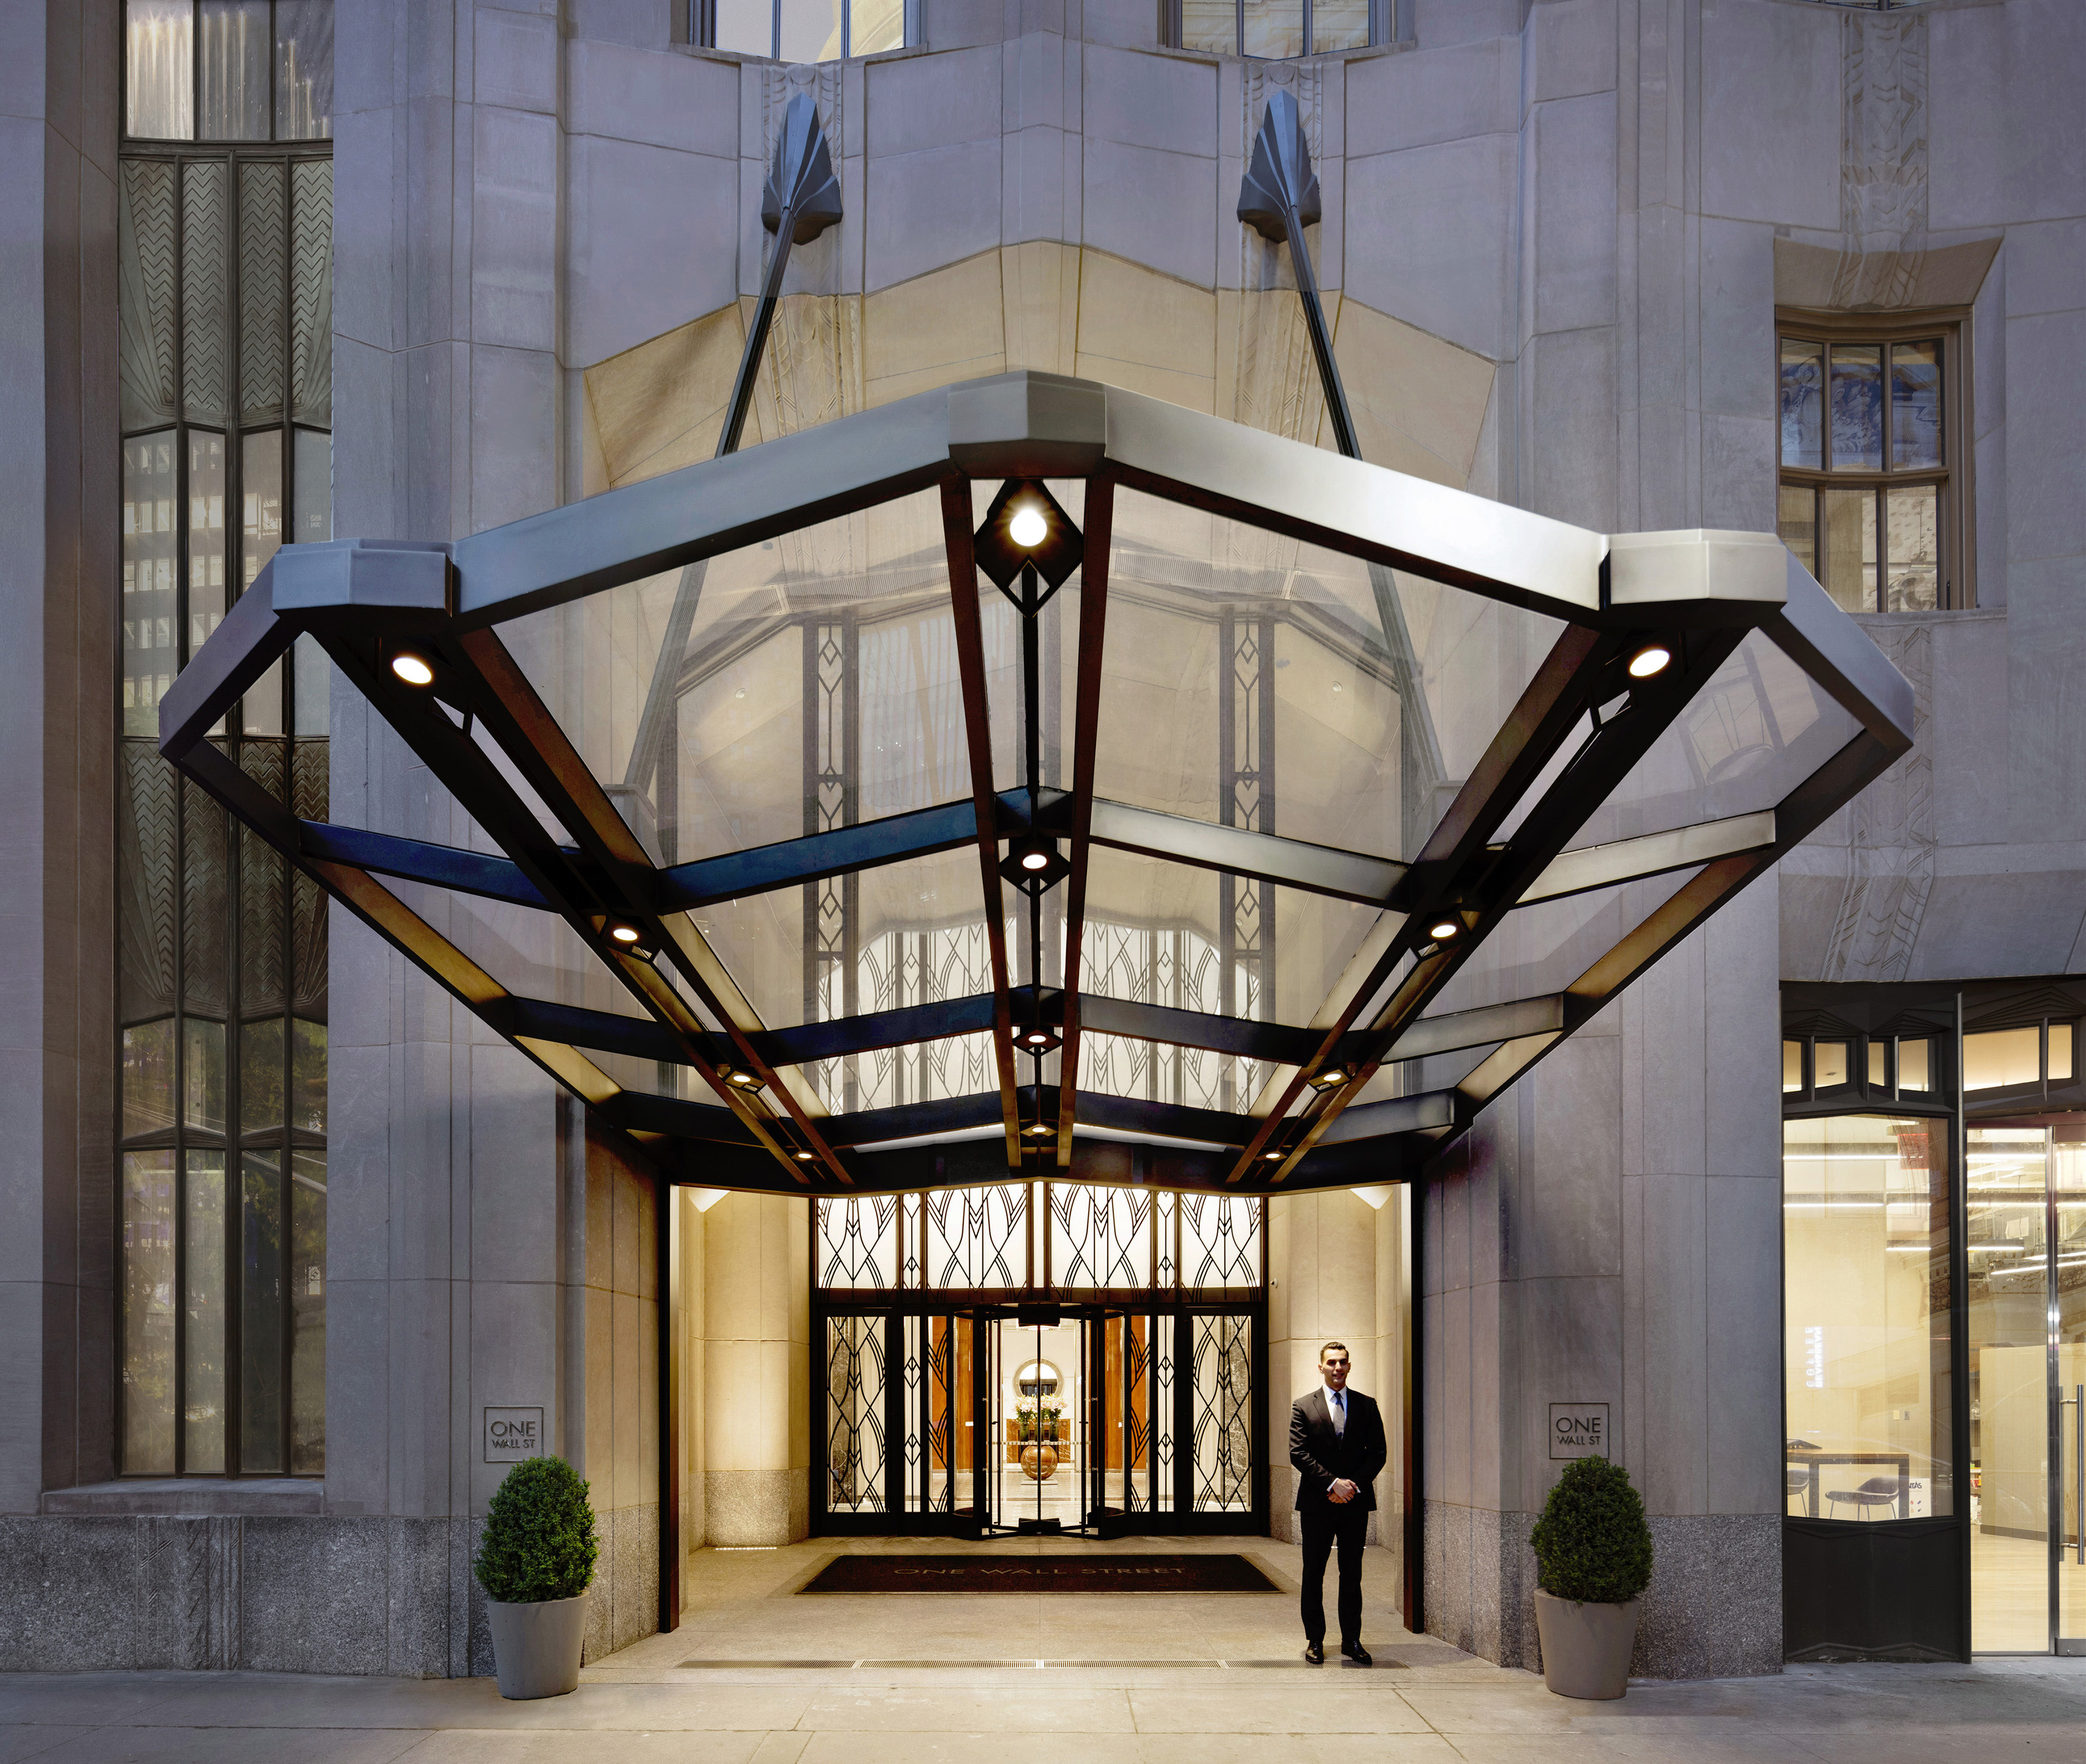 View from across the street of the One Wall Street lobby entrance with a male concierge standing outside the front door.